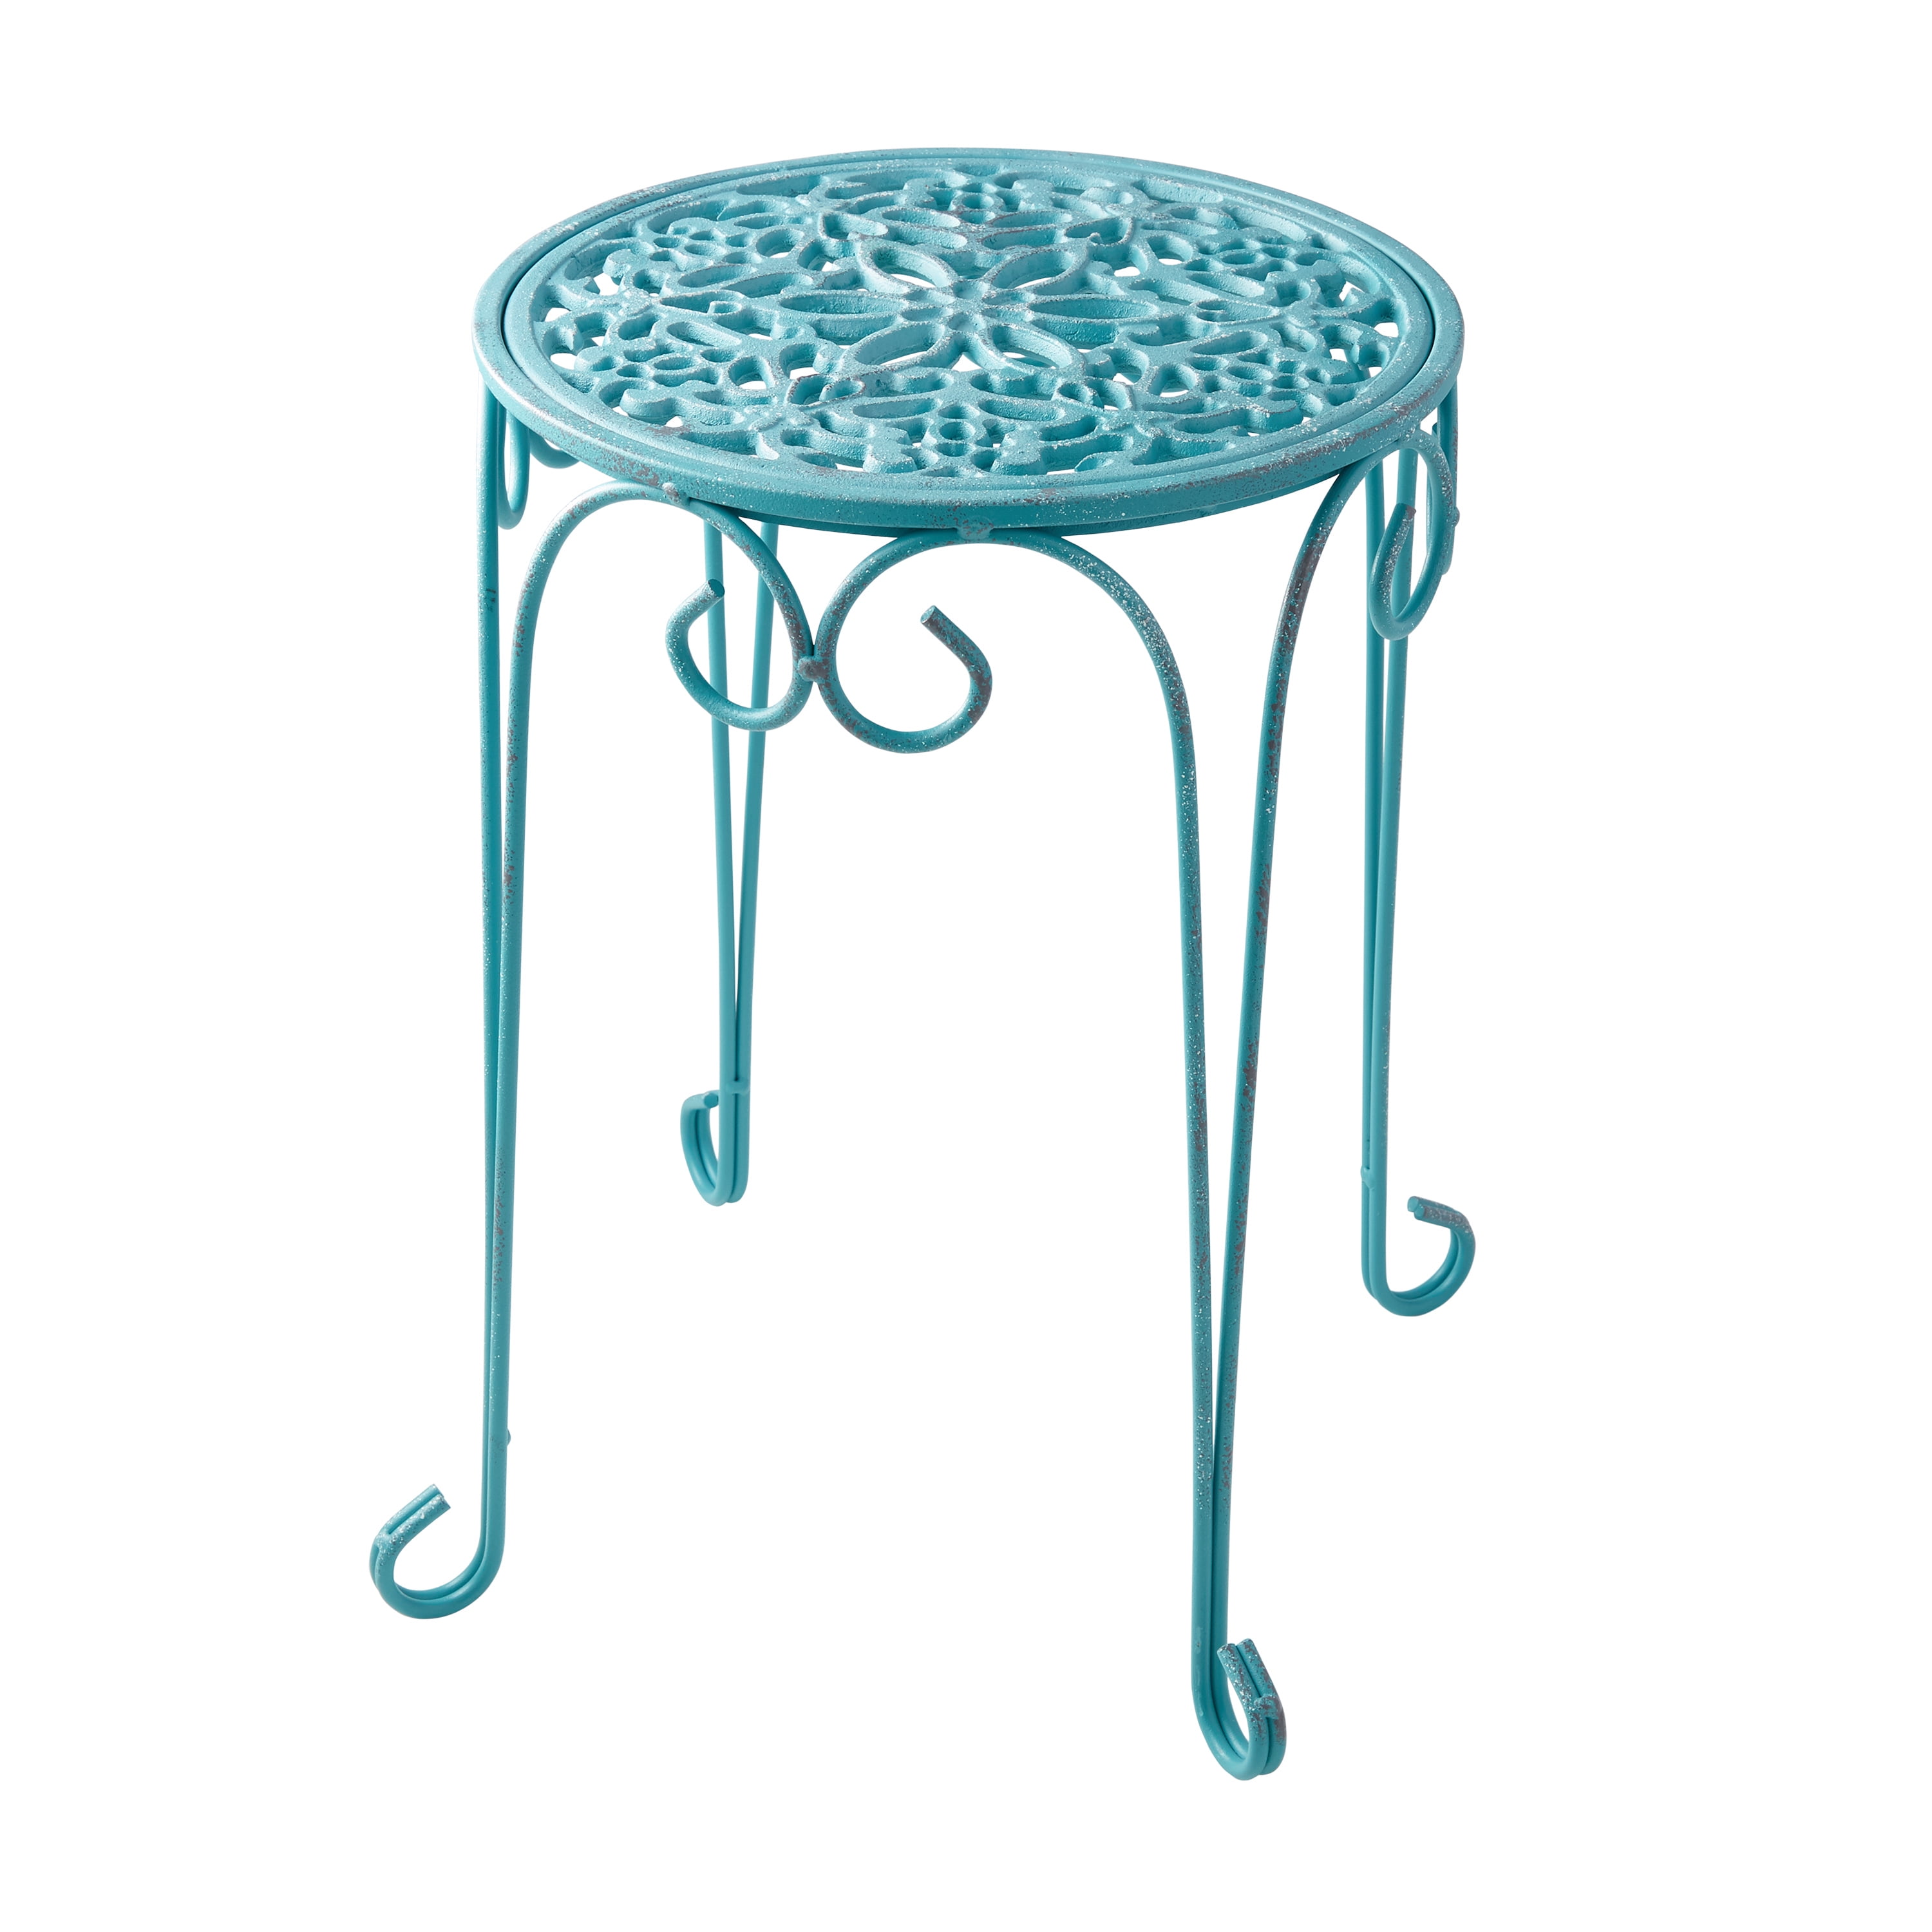 The Pioneer Woman 16 Cast Iron Plant Stand Teal Color with Distressed  Finish